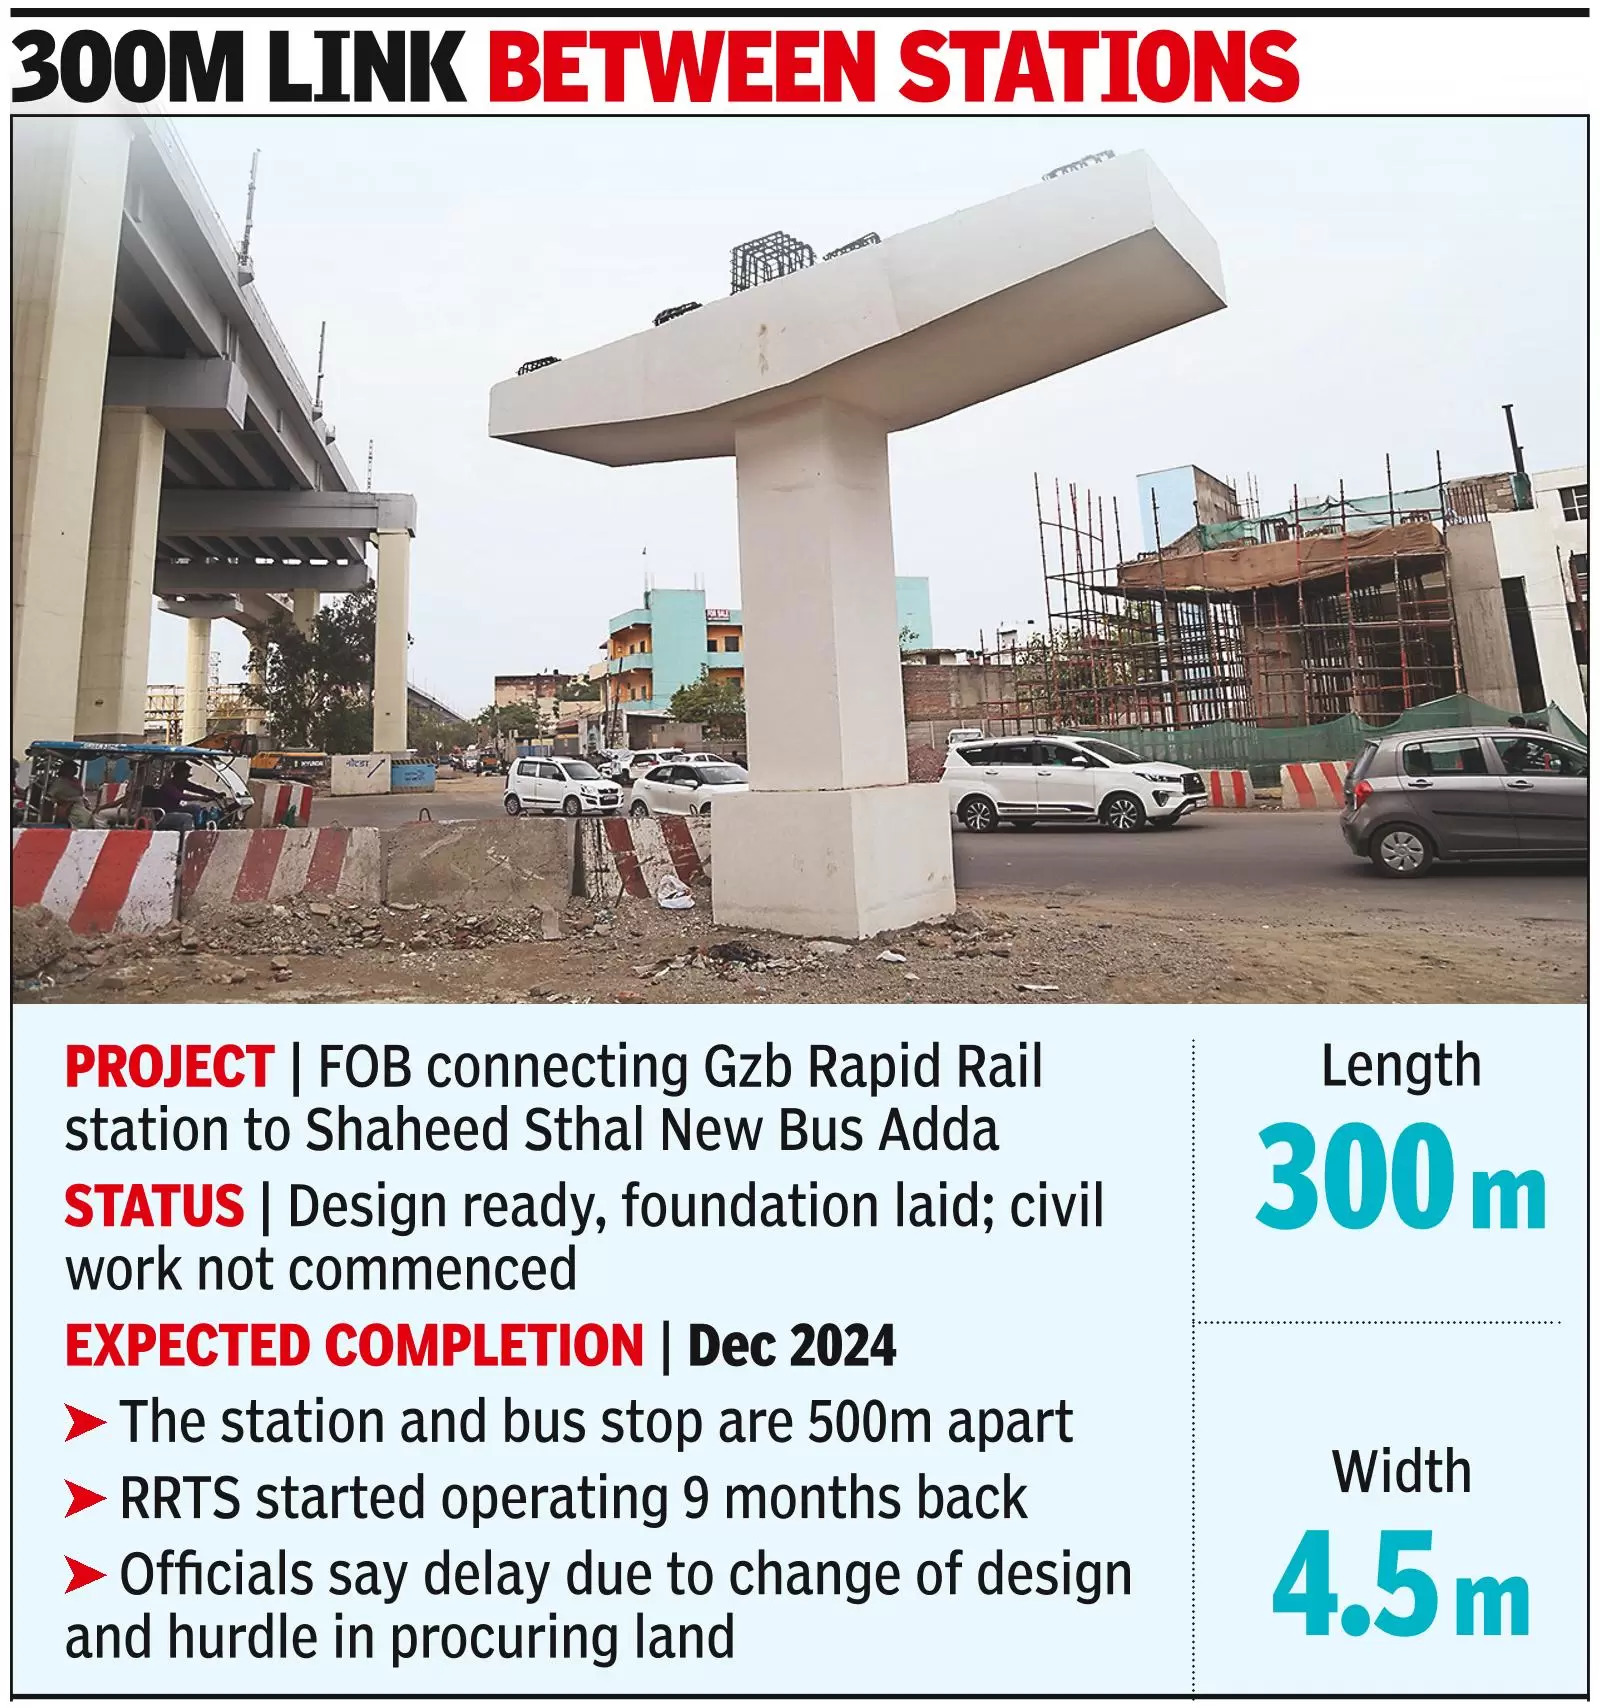 9 months gone, footbridge to link Gzb RRTS, Bus Adda metro stns not ready